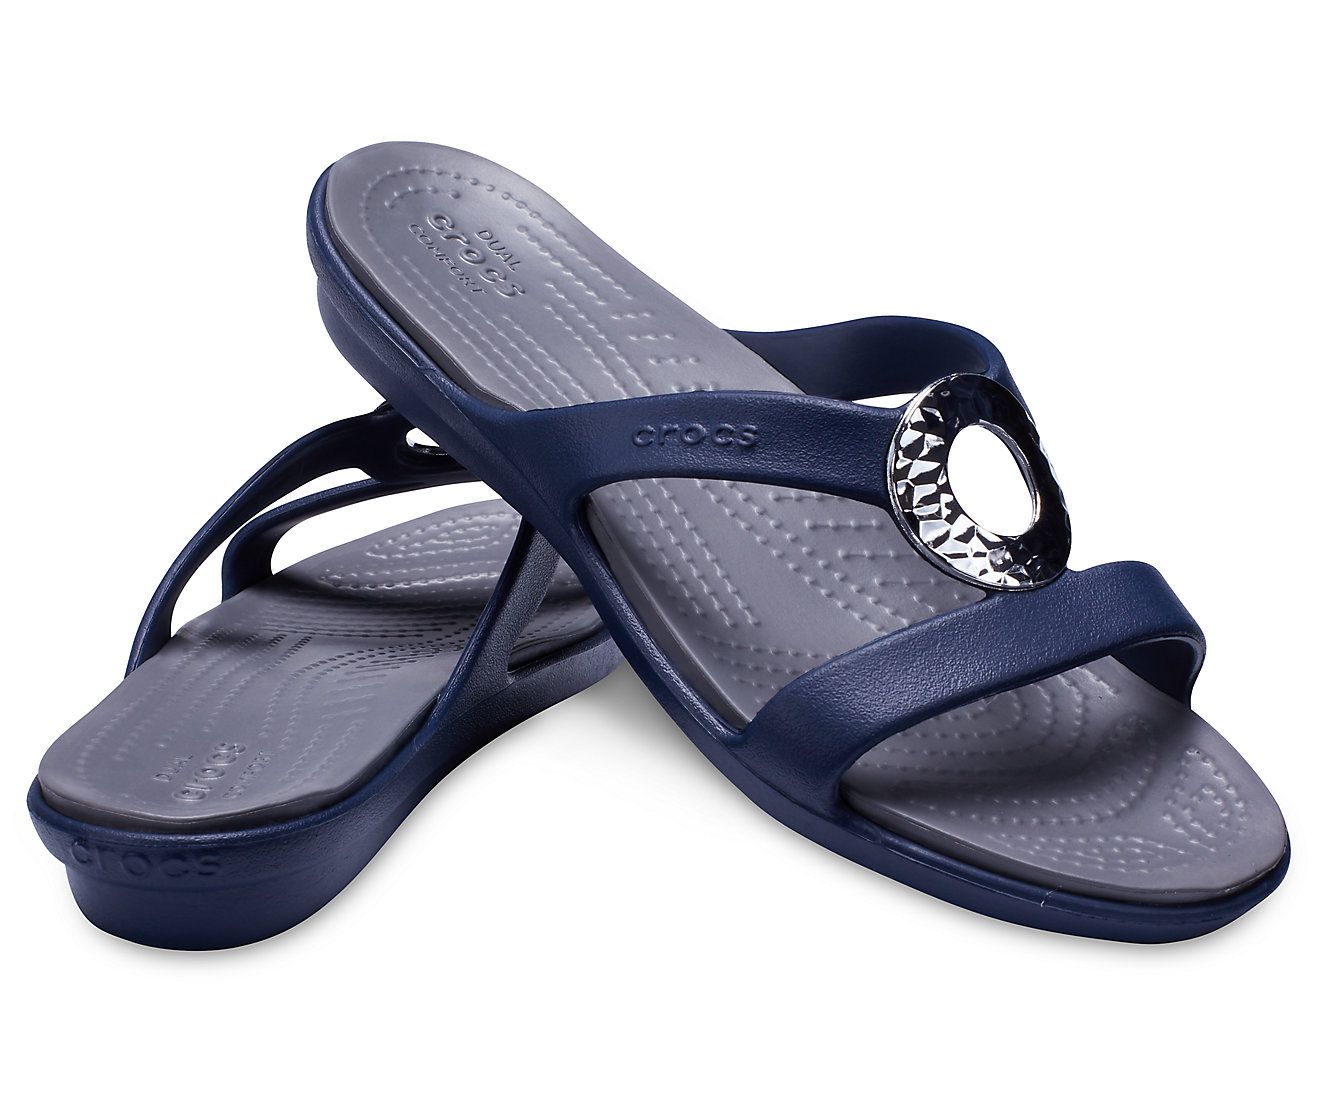 Crocs Navy Flats Price in India- Buy Crocs Navy Flats Online at Snapdeal